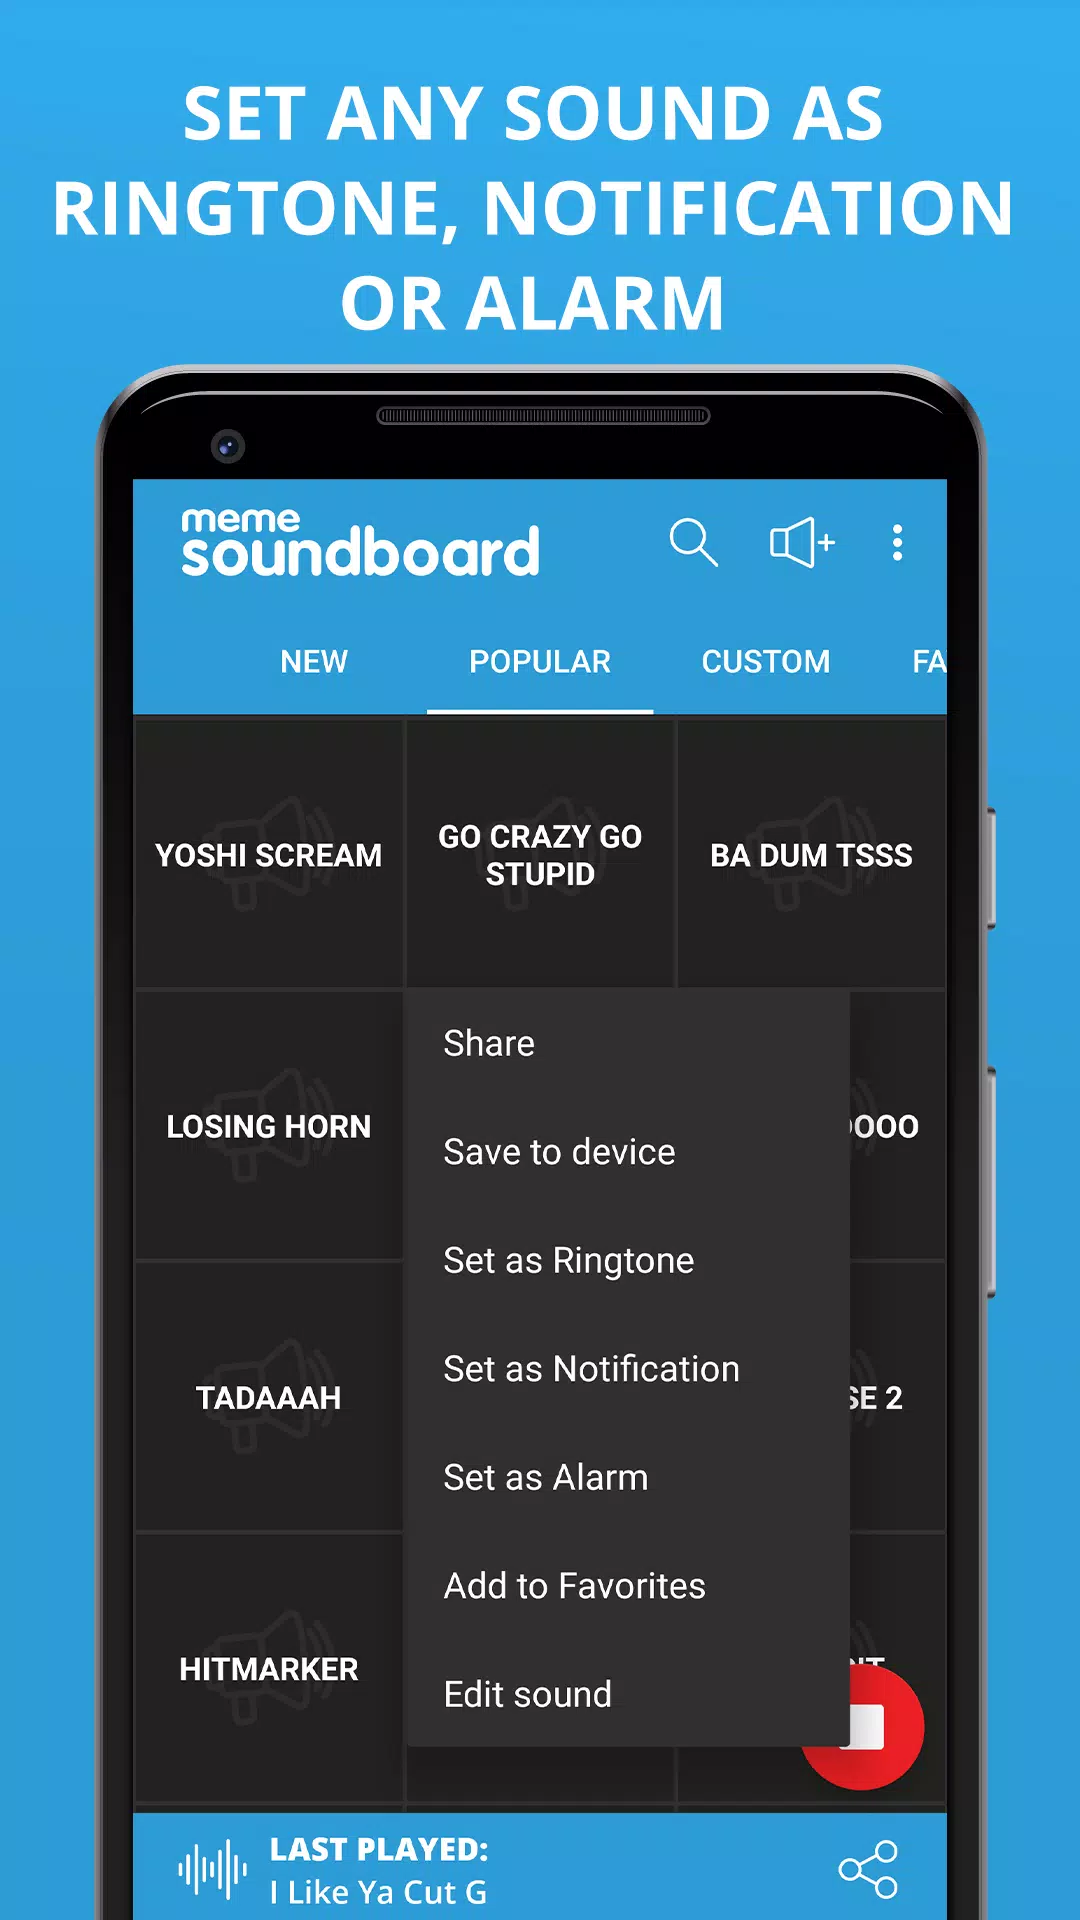 Meme Soundboard by ZomboDroid for Android - APK Download